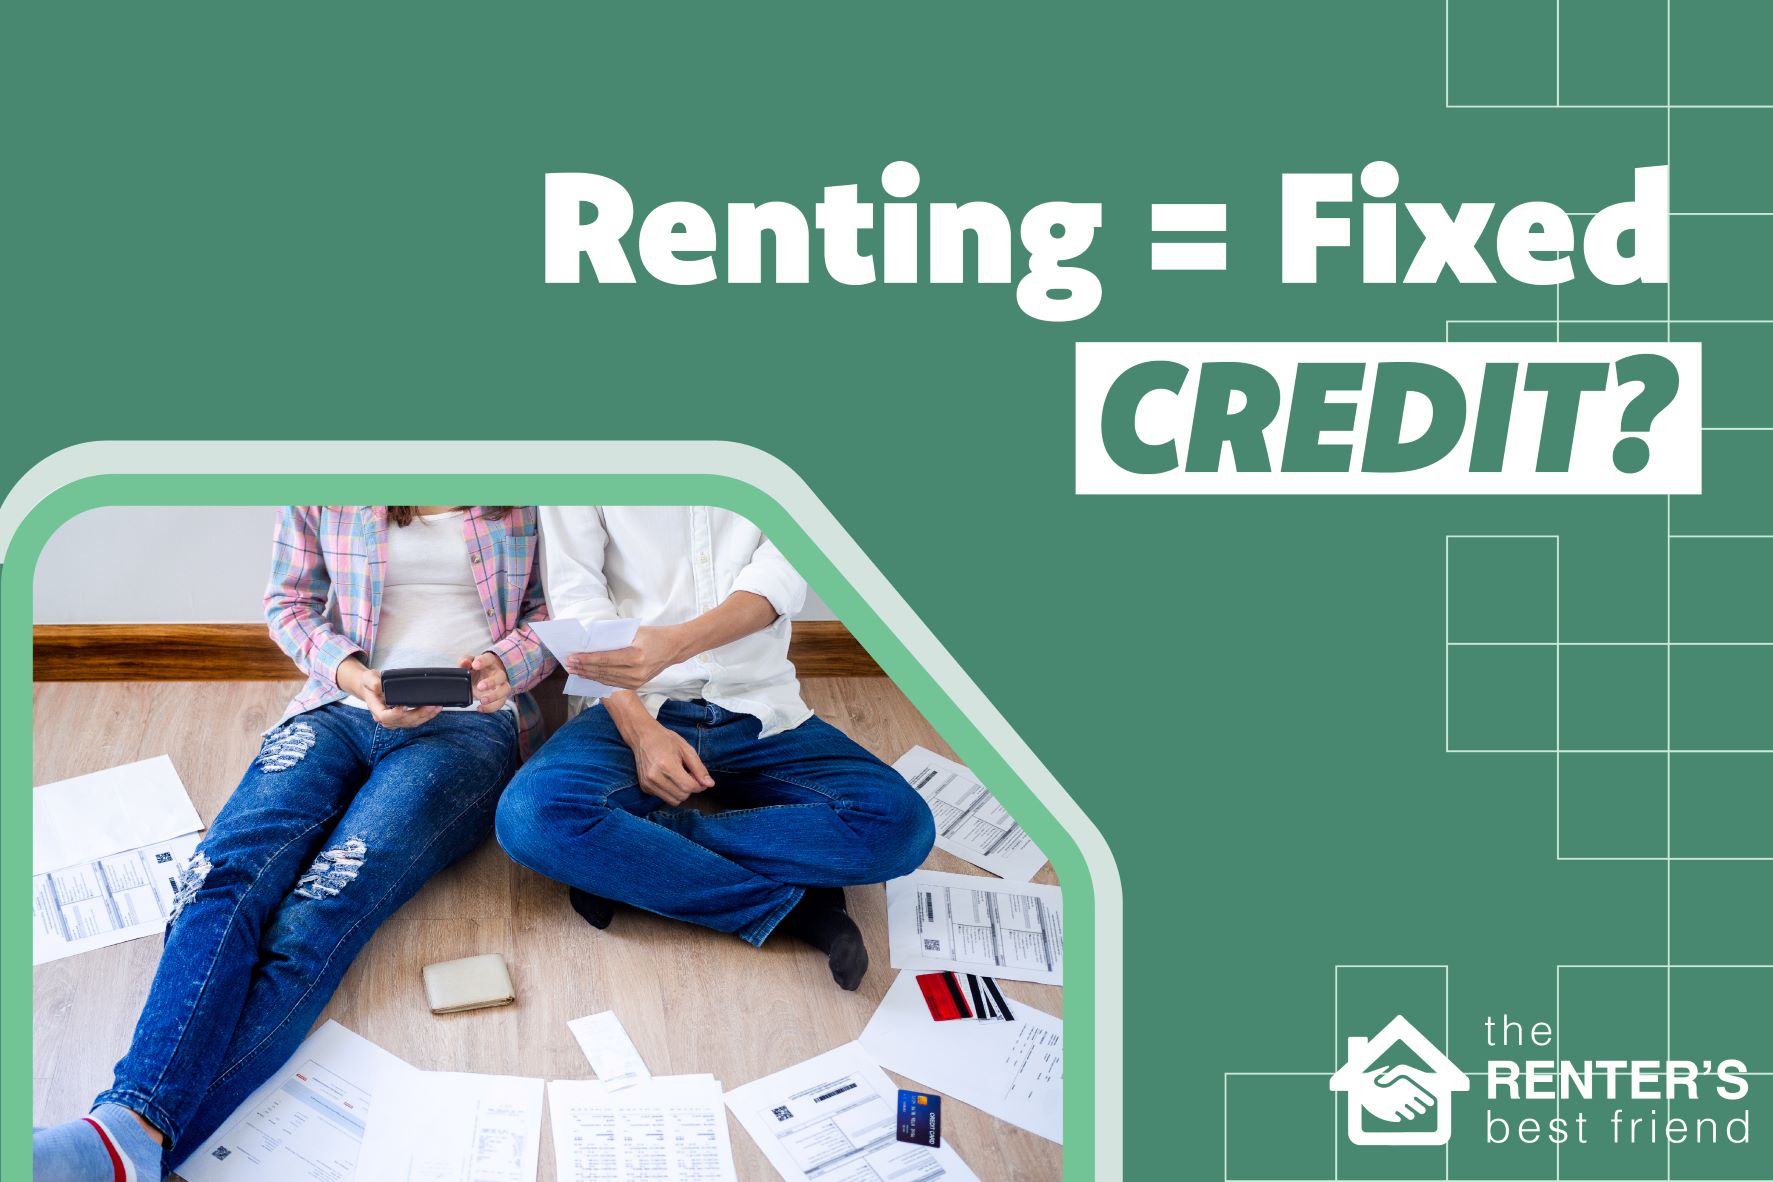 Can renting fix your credit score?